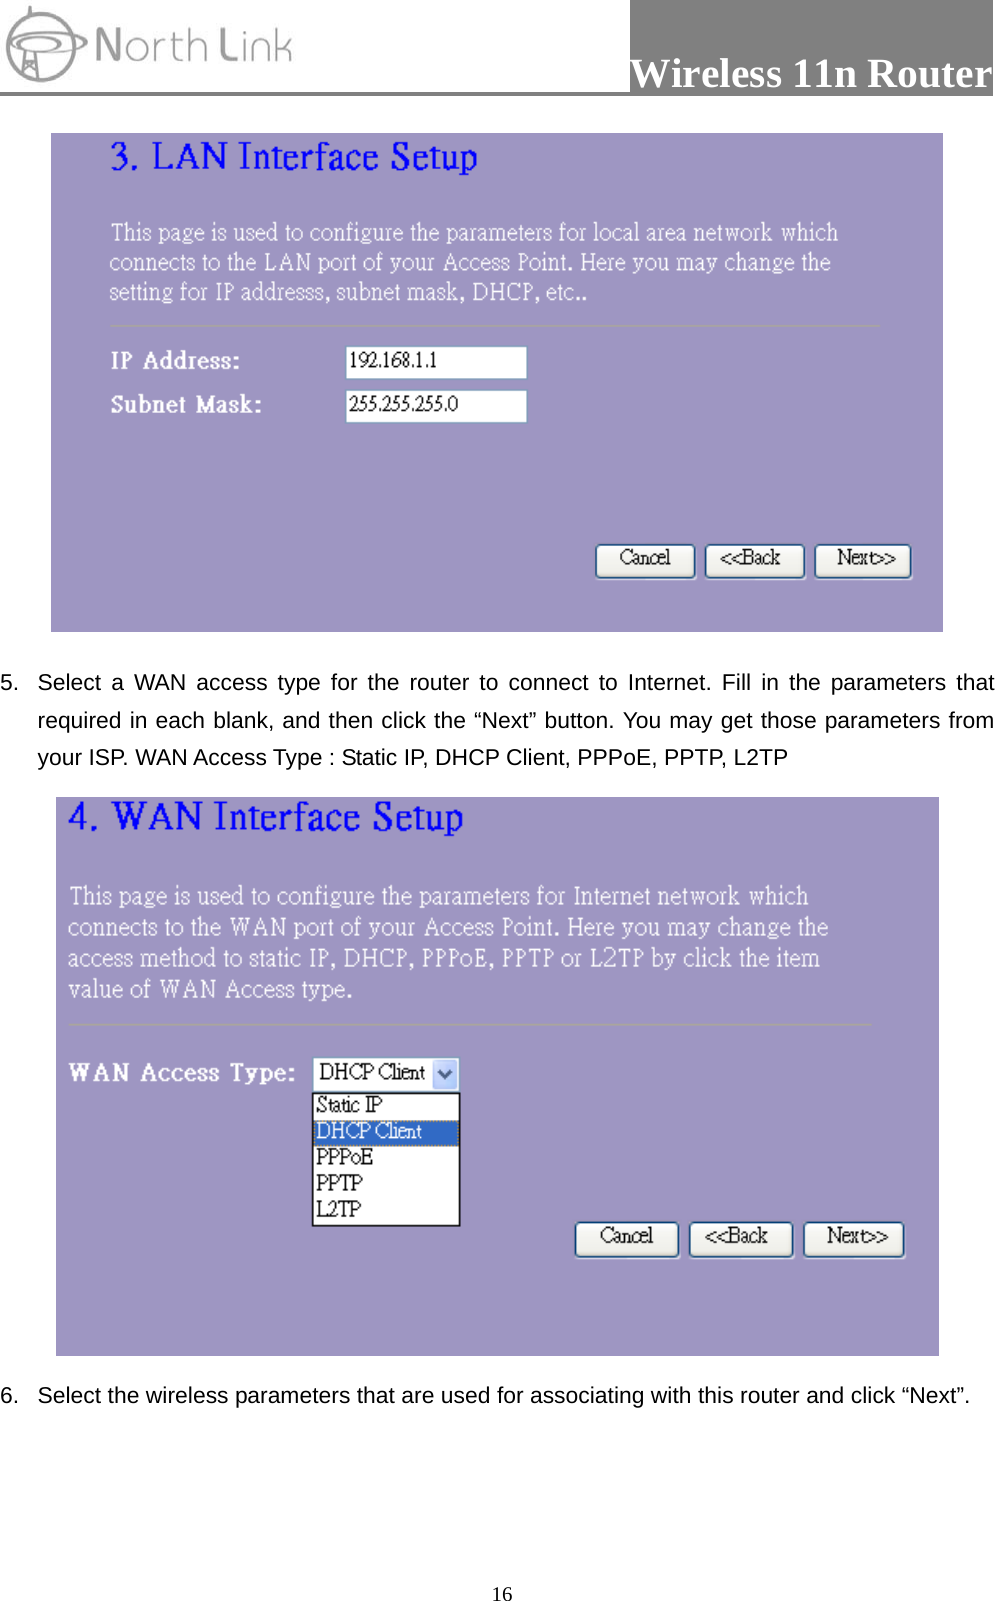                 Wireless 11n Router   16 5.  Select a WAN access type for the router to connect to Internet. Fill in the parameters that required in each blank, and then click the “Next” button. You may get those parameters from your ISP. WAN Access Type : Static IP, DHCP Client, PPPoE, PPTP, L2TP  6.  Select the wireless parameters that are used for associating with this router and click “Next”. 